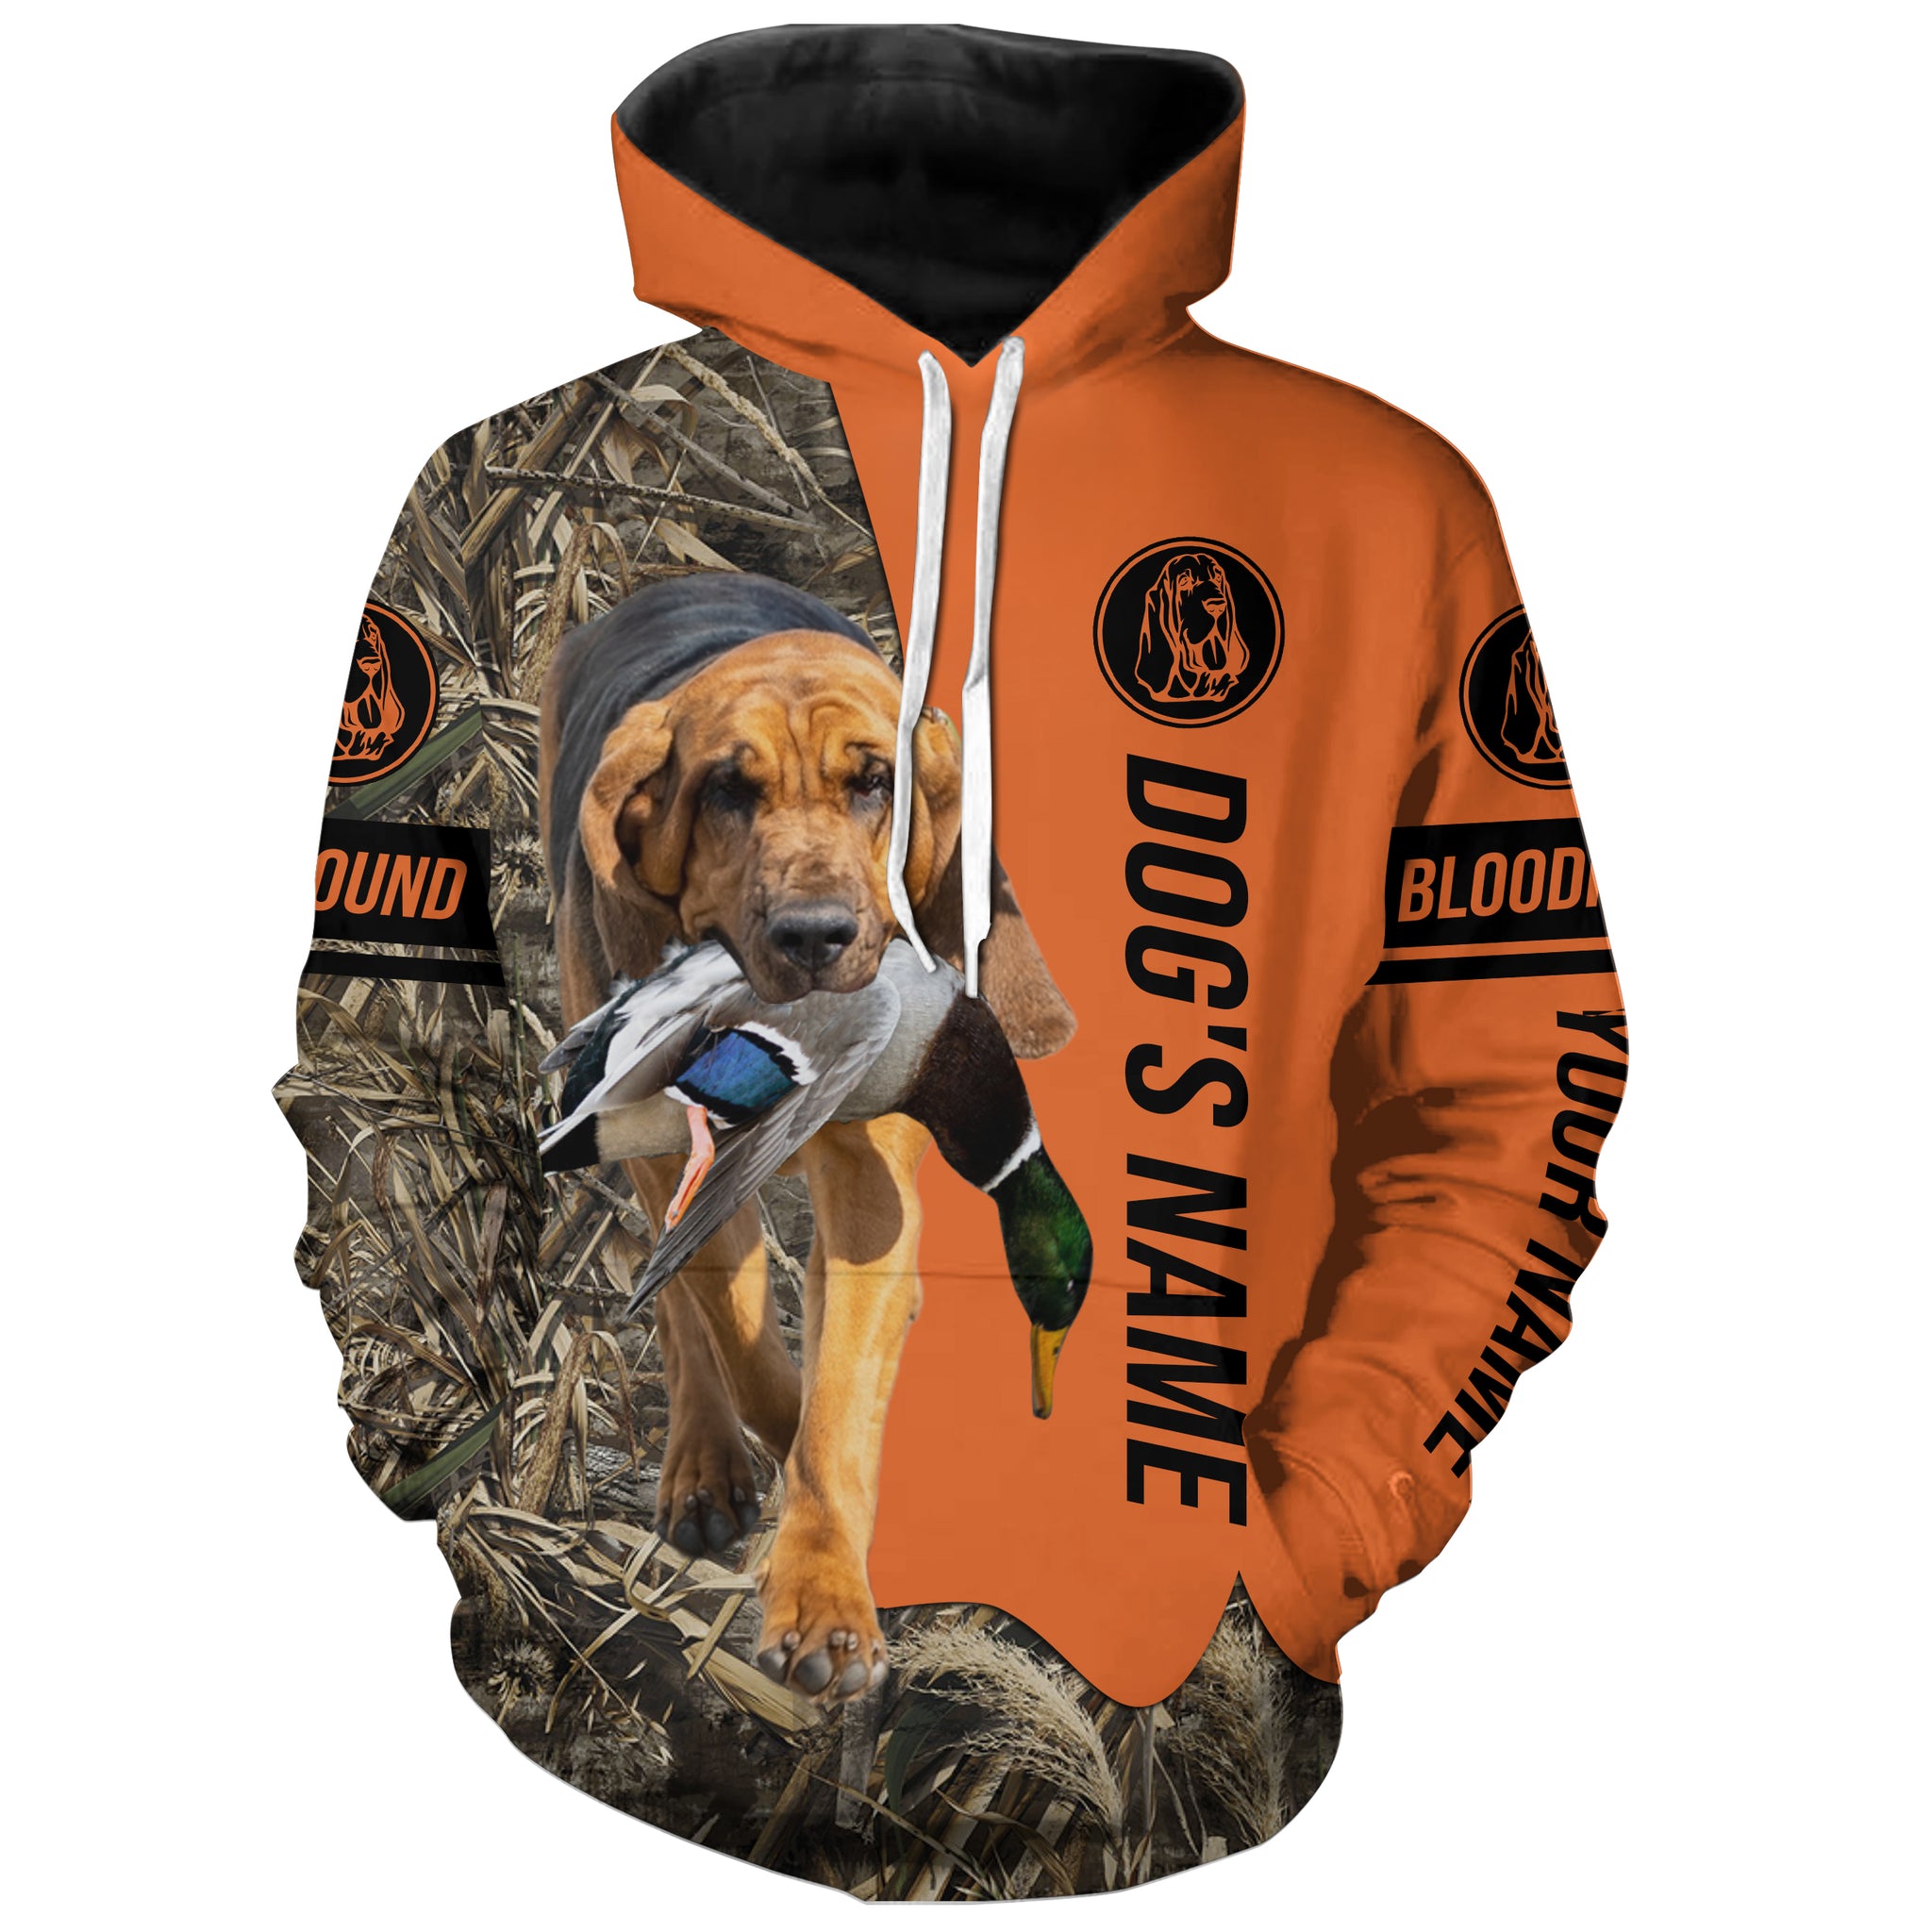 Bloodhound Duck Pheasant Bird Hunting Dog Customized Name All over printed Shirts for Hunters FSD4260